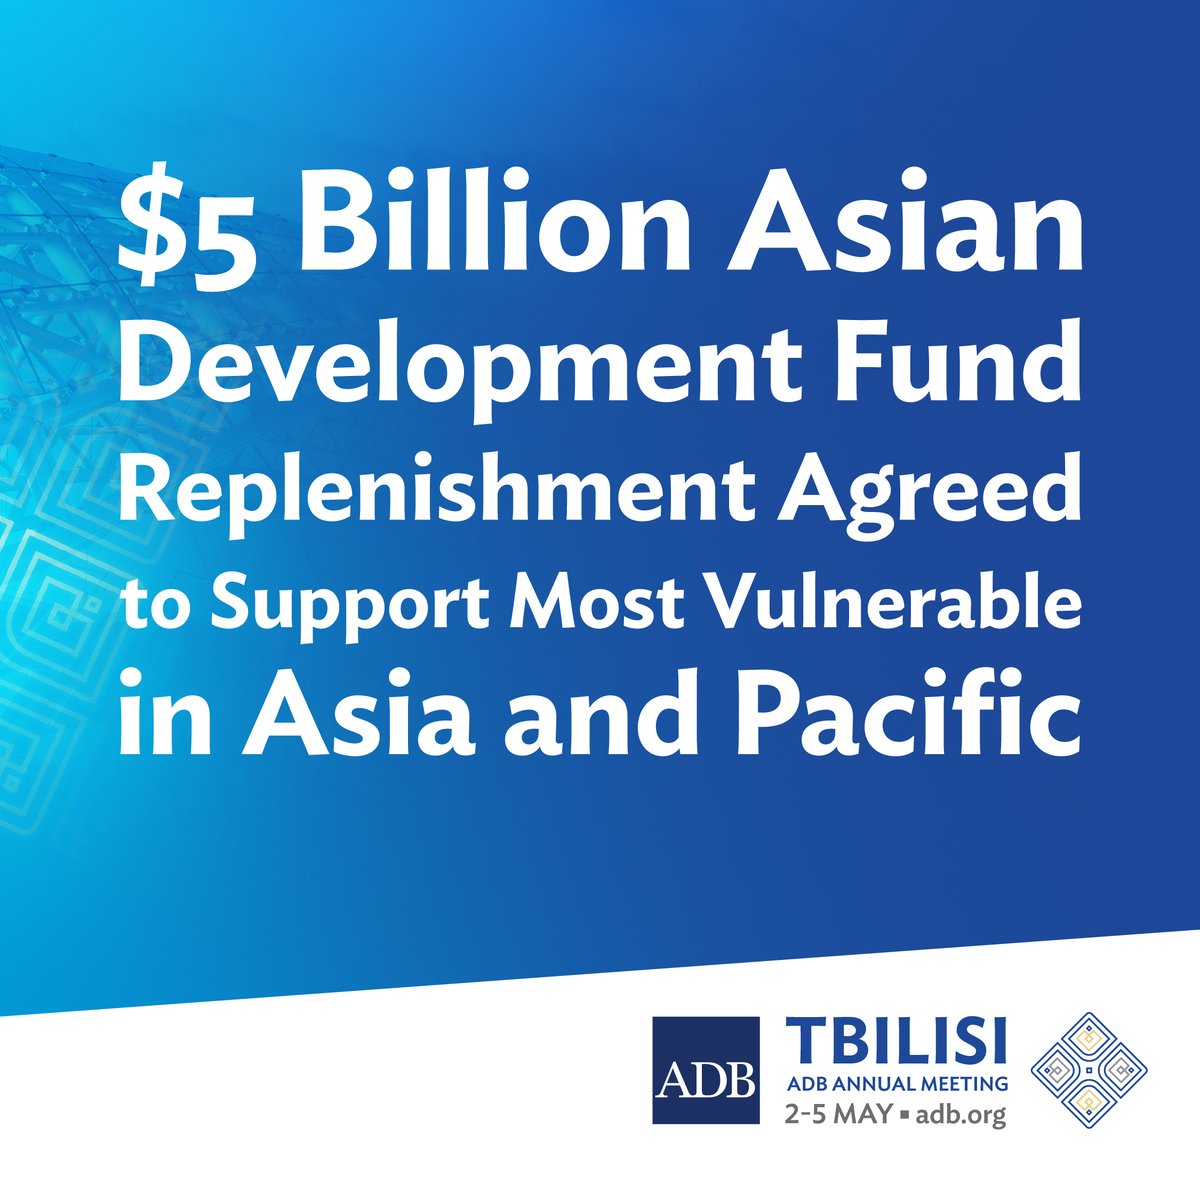 #ADBNews: ADB President Masa Asakawa today announced a $5 billion replenishment for the Asian Development Fund. The ADF is ADB’s largest source of grants to support the poorest and most vulnerable developing member countries. The Fund is replenished by ADB and donor